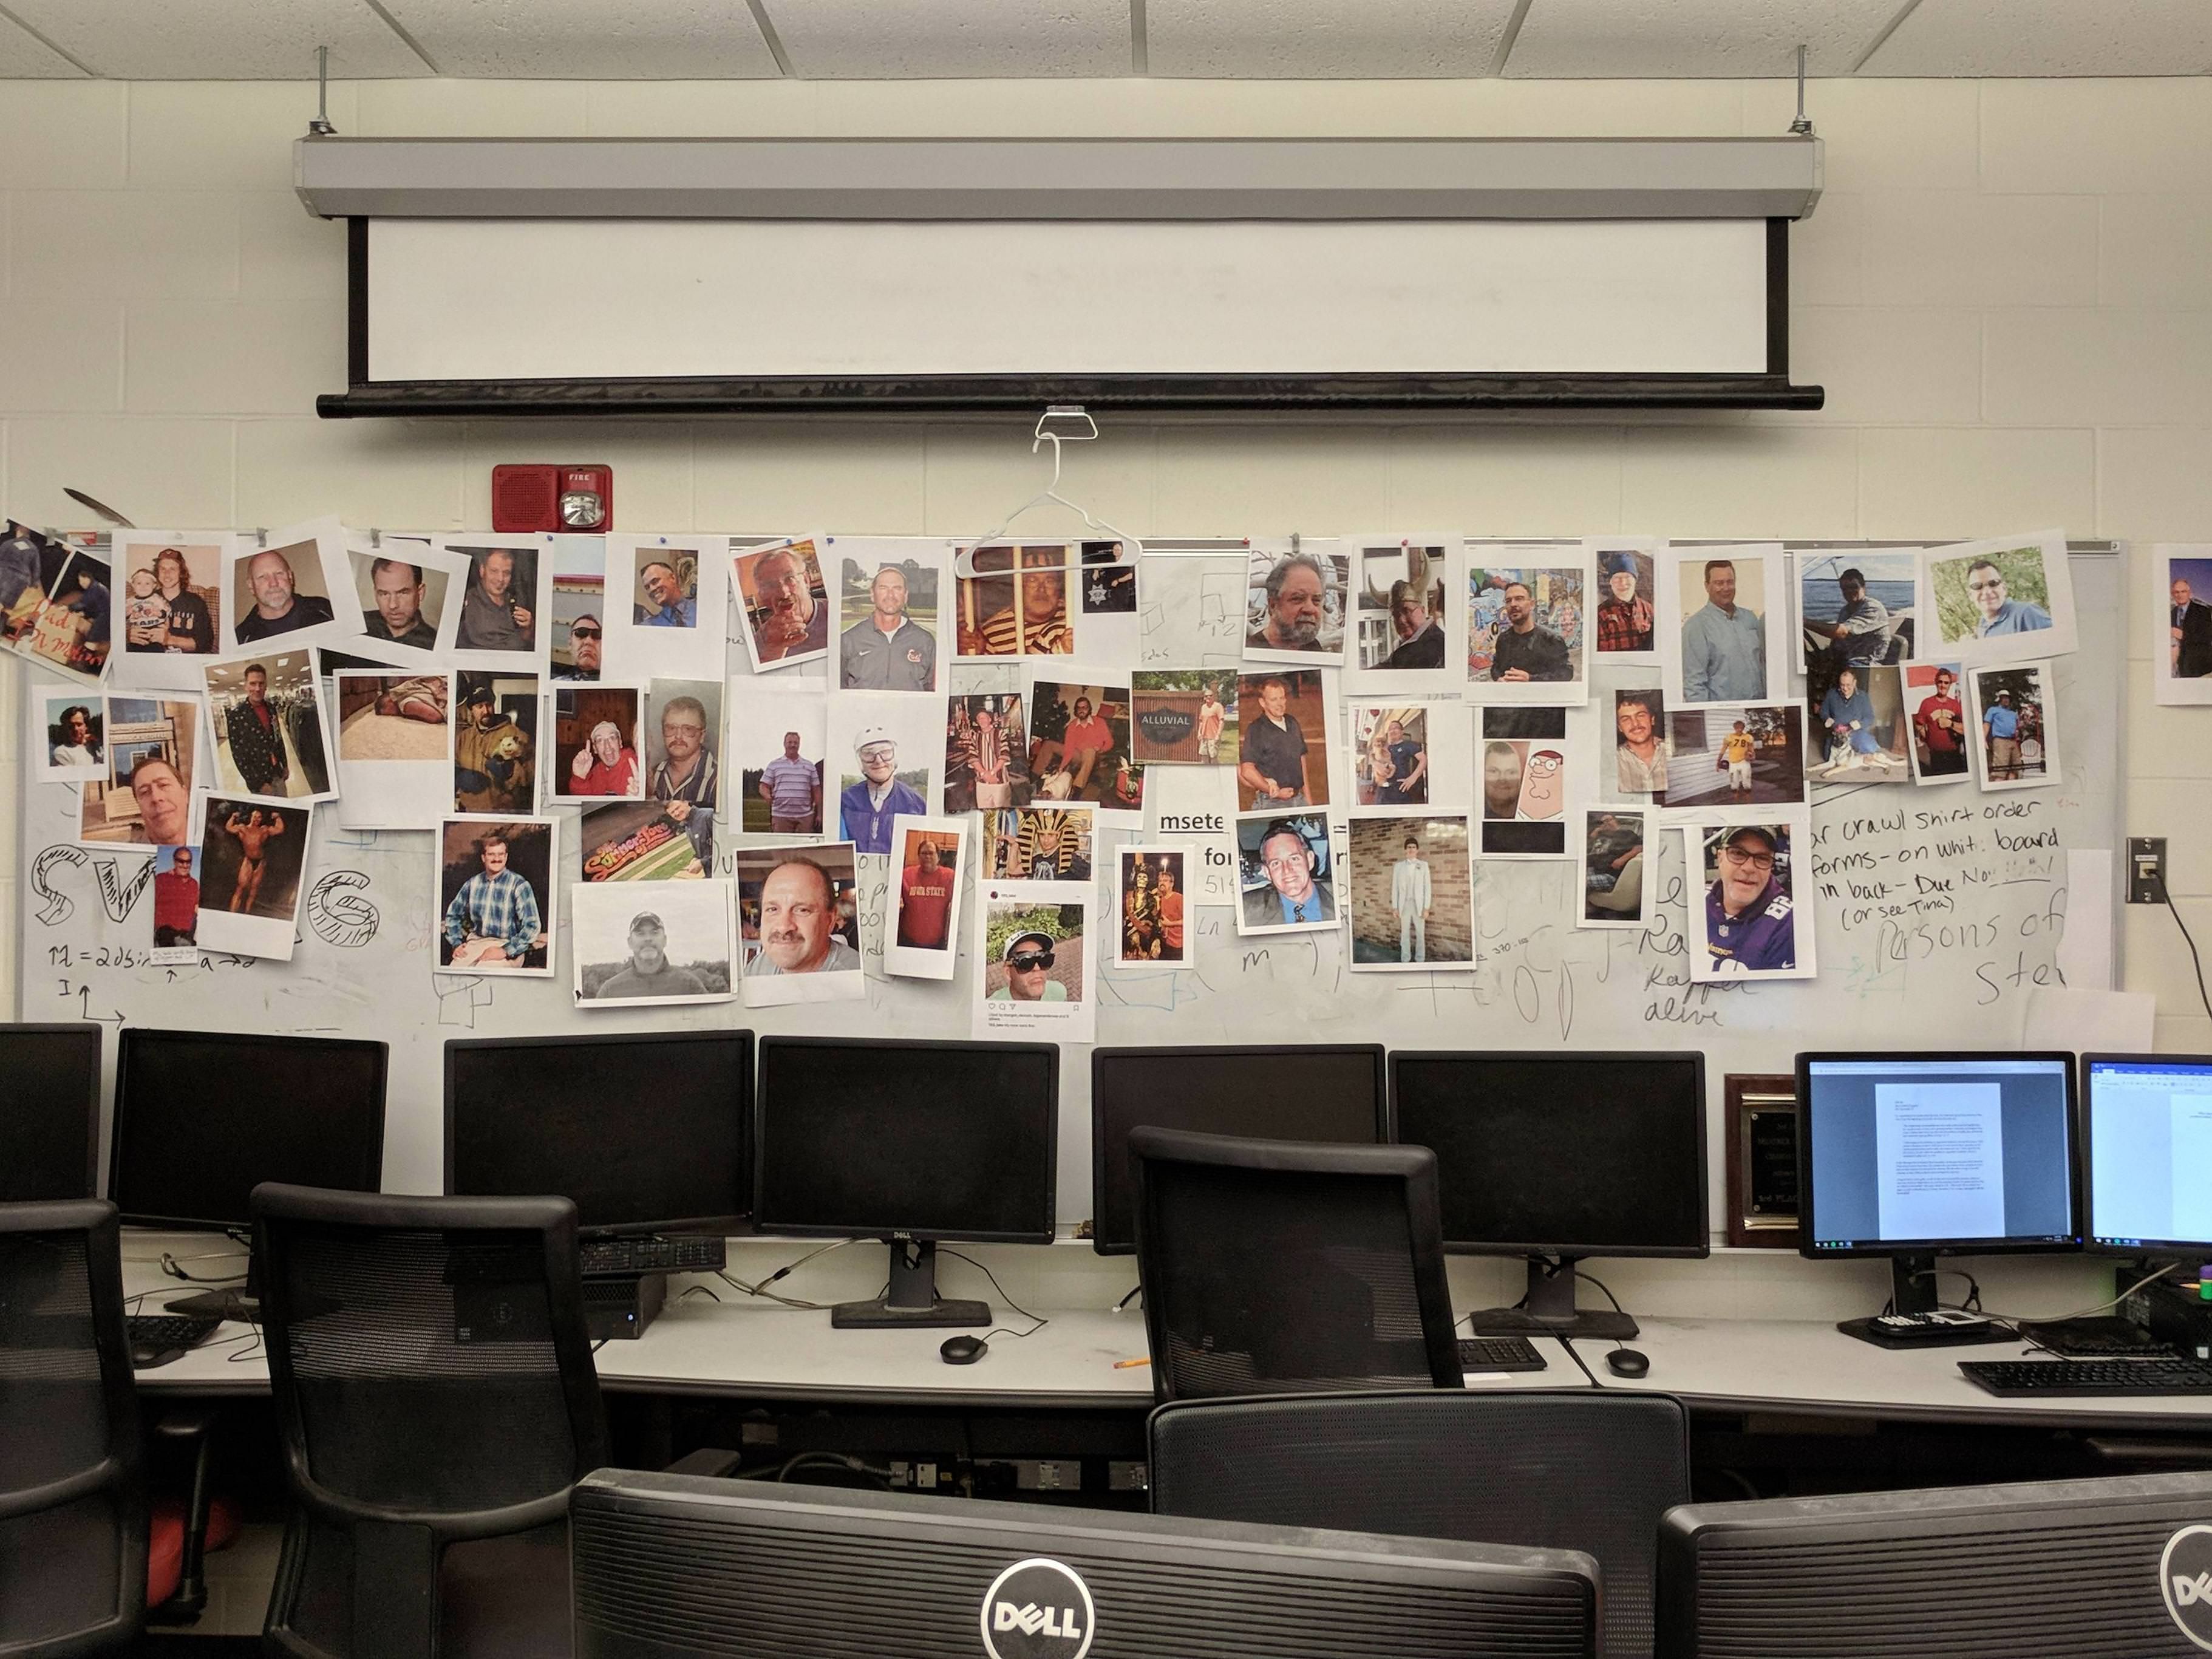 My friend and I thought it would be funny to hang candid pictures of our dads on the computer lab wall at my uni. It kind of took off. I give you, the Dad Wall.